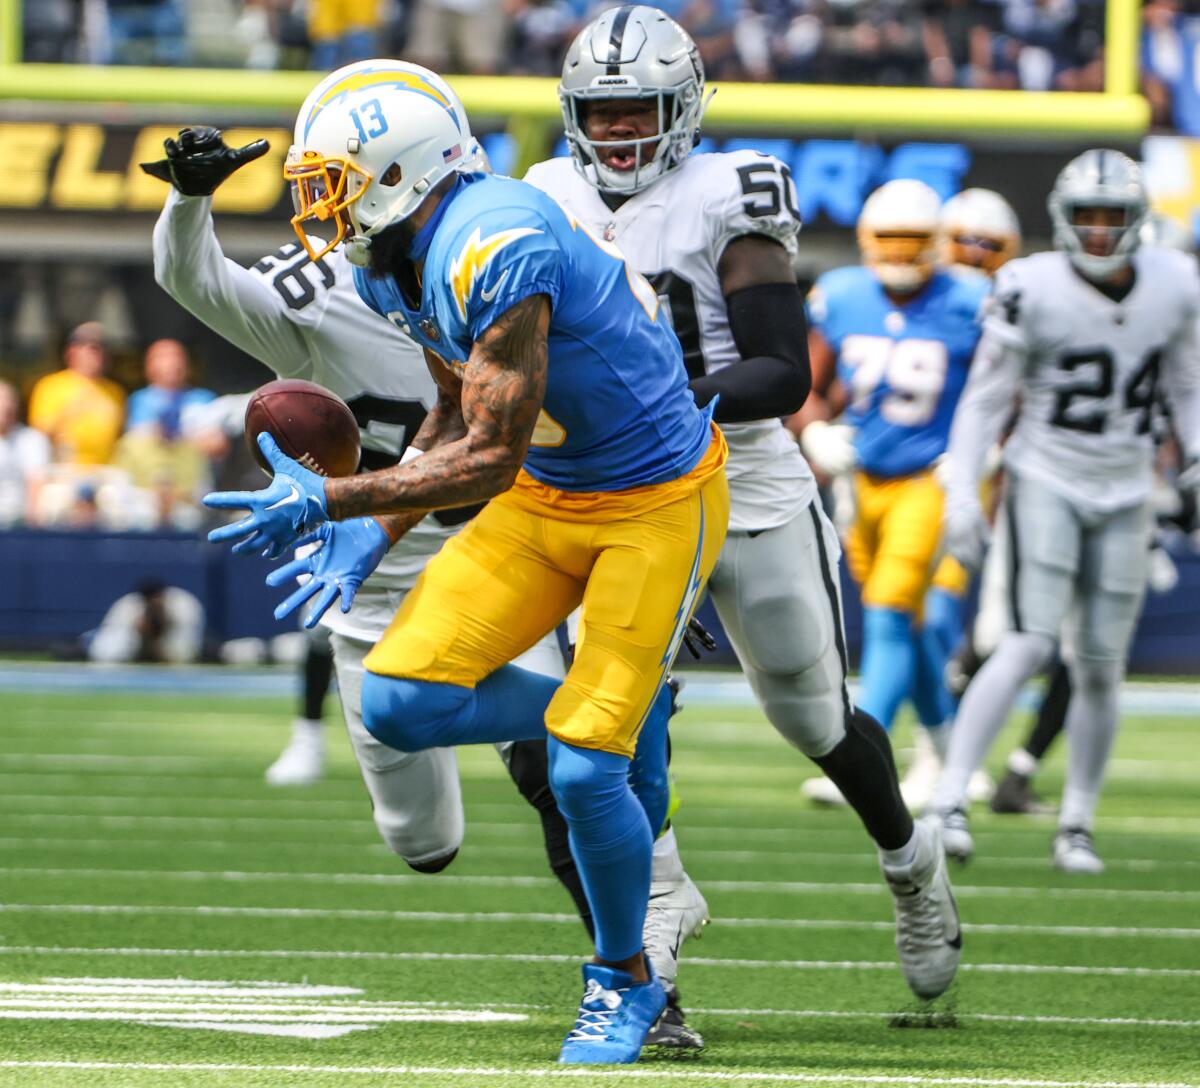 Chargers wide receiver Keenan Allen hauls in a pass from Justin Herbert during the first quarter.